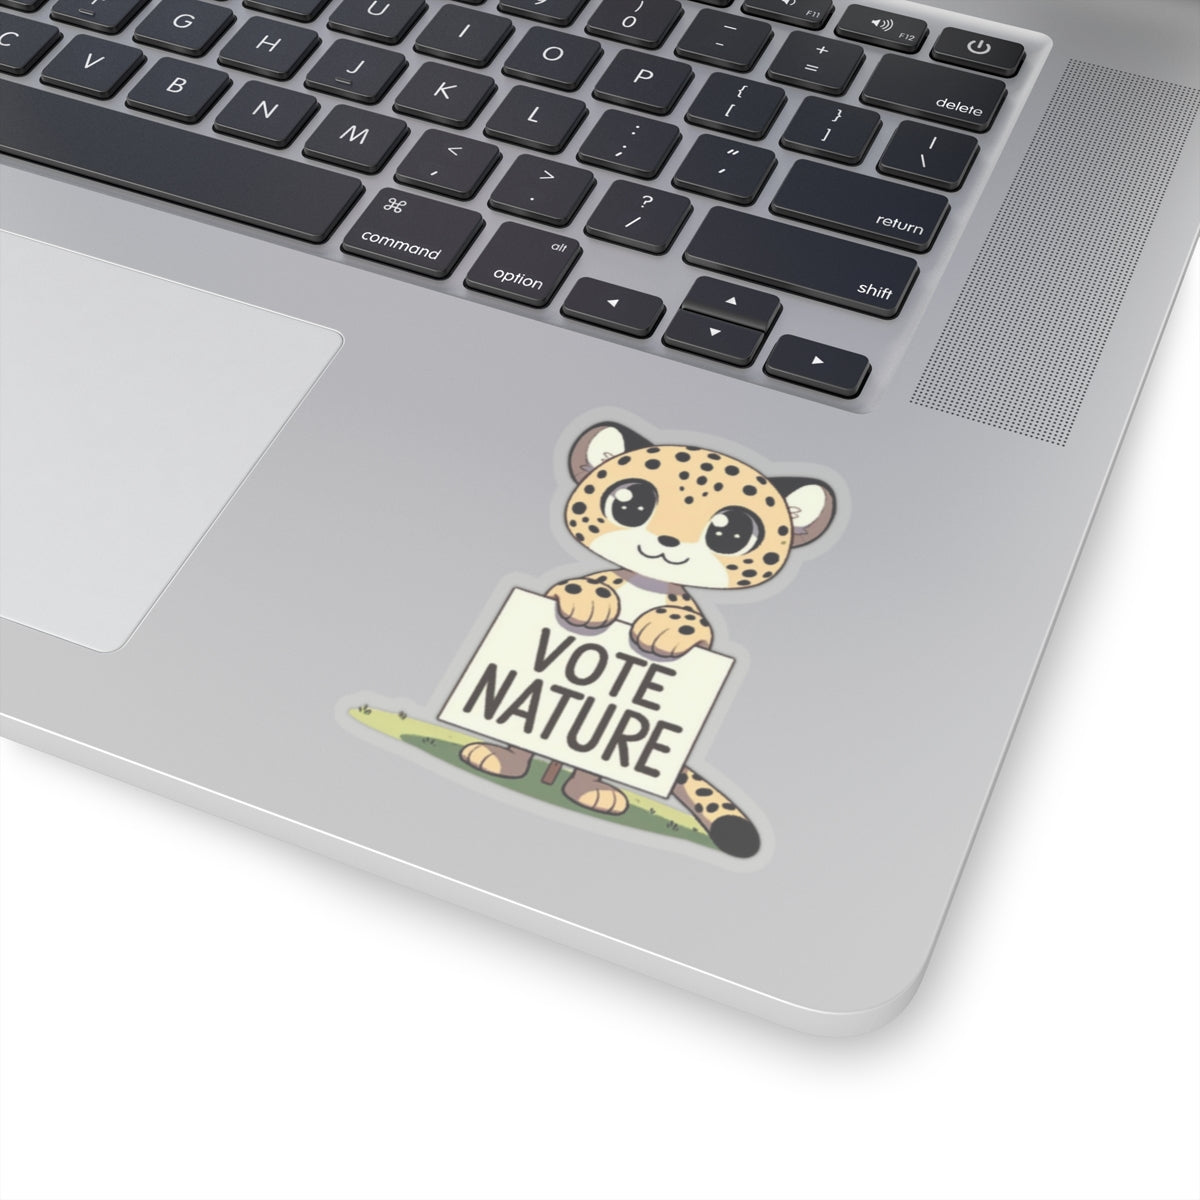 Inspirational Cute Cheetah Statement vinyl Sticker: Vote Nature! for laptop, kindle, phone, ipad, instrument case, notebook, mood board